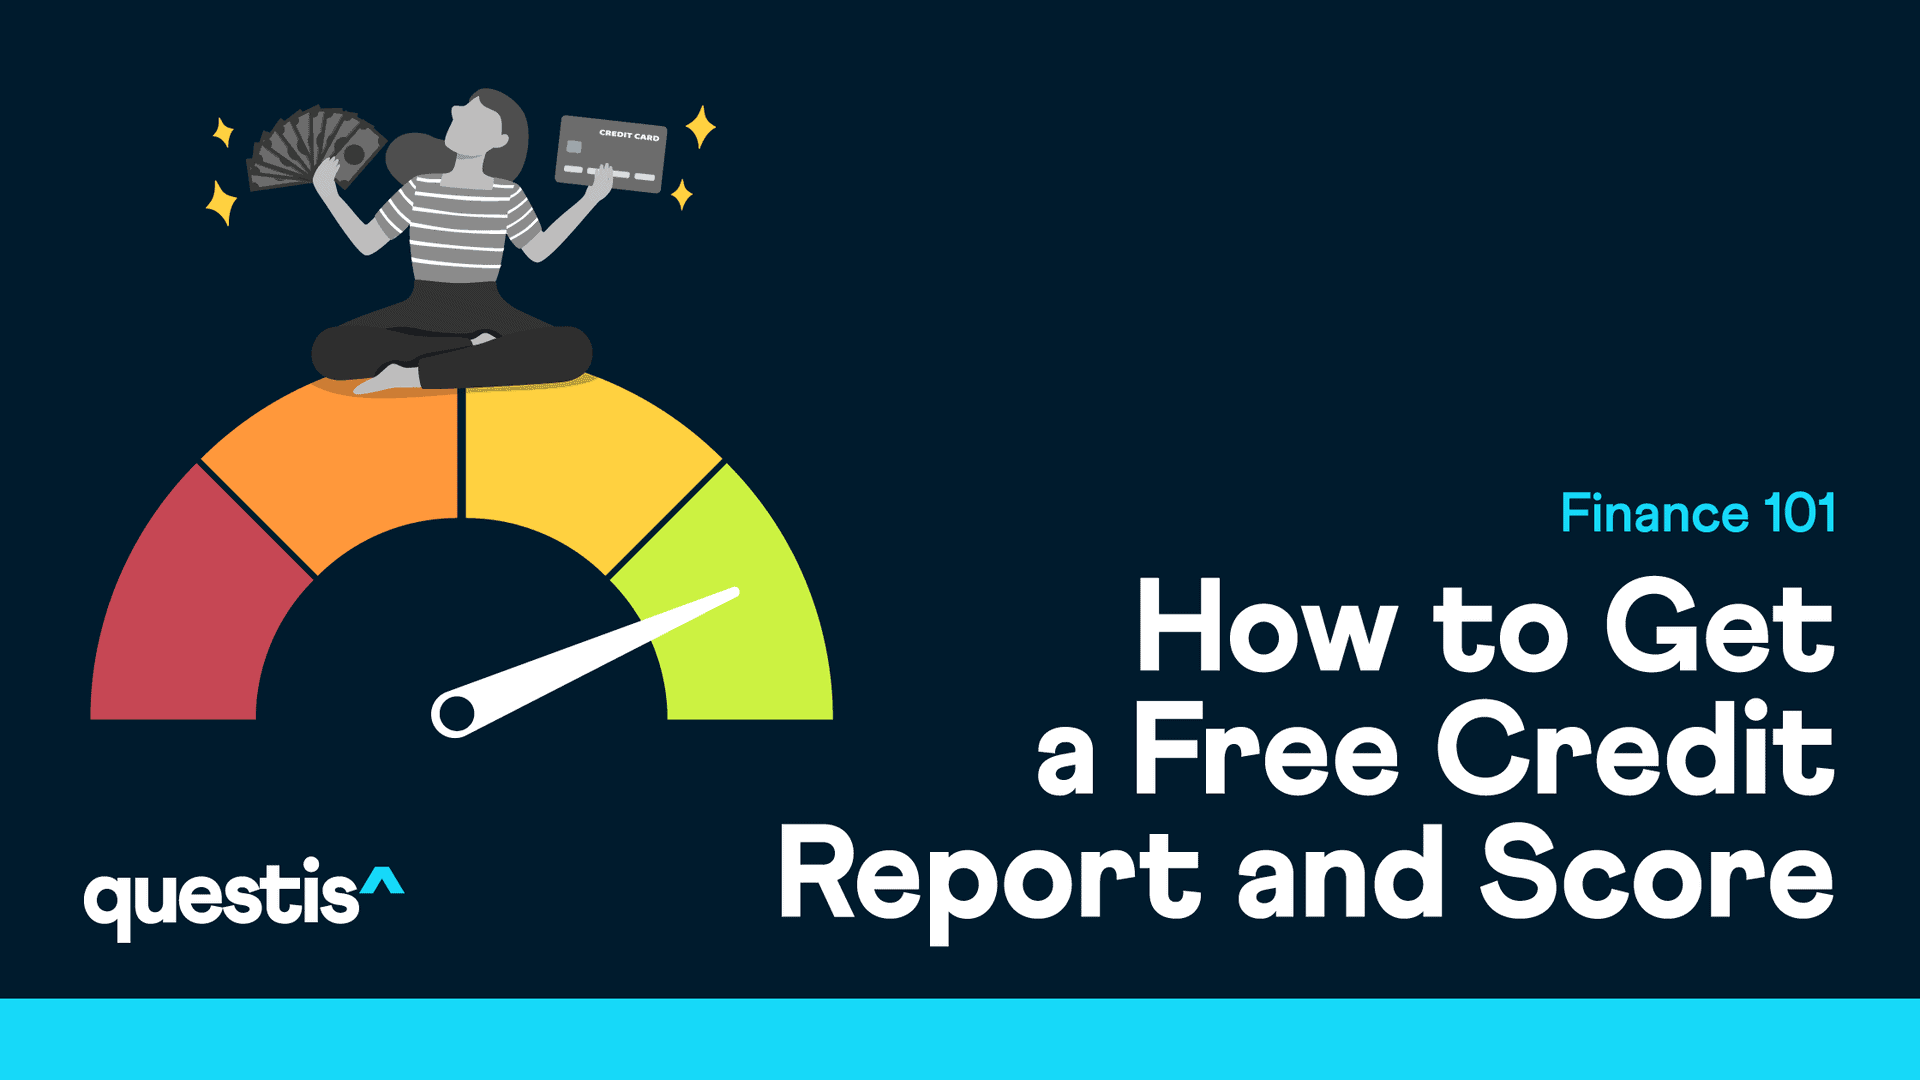 How to Get a Free Credit Report and Score